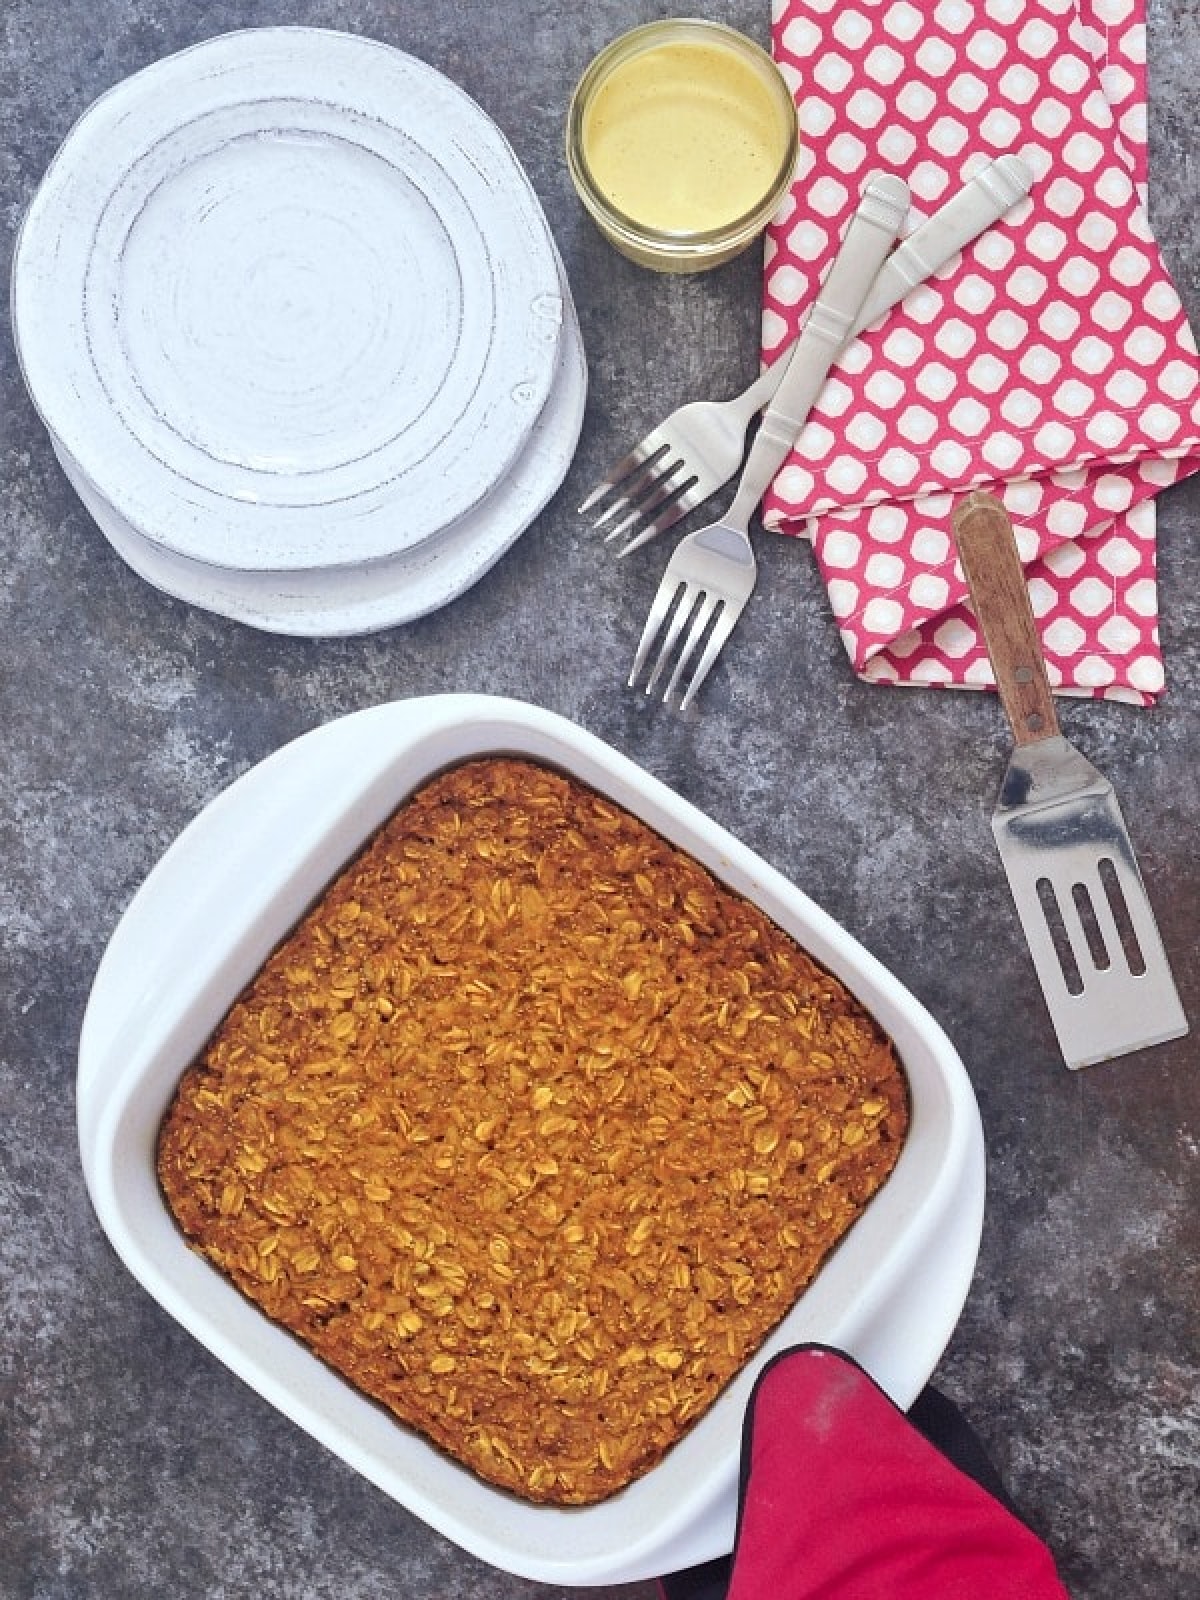 Overhead view of a white ceramic baking pan of baked pumpkin oatmeal held with a red oven glove, with a small glass jar of golden cashew cream, a stack of plates and forks on the side.